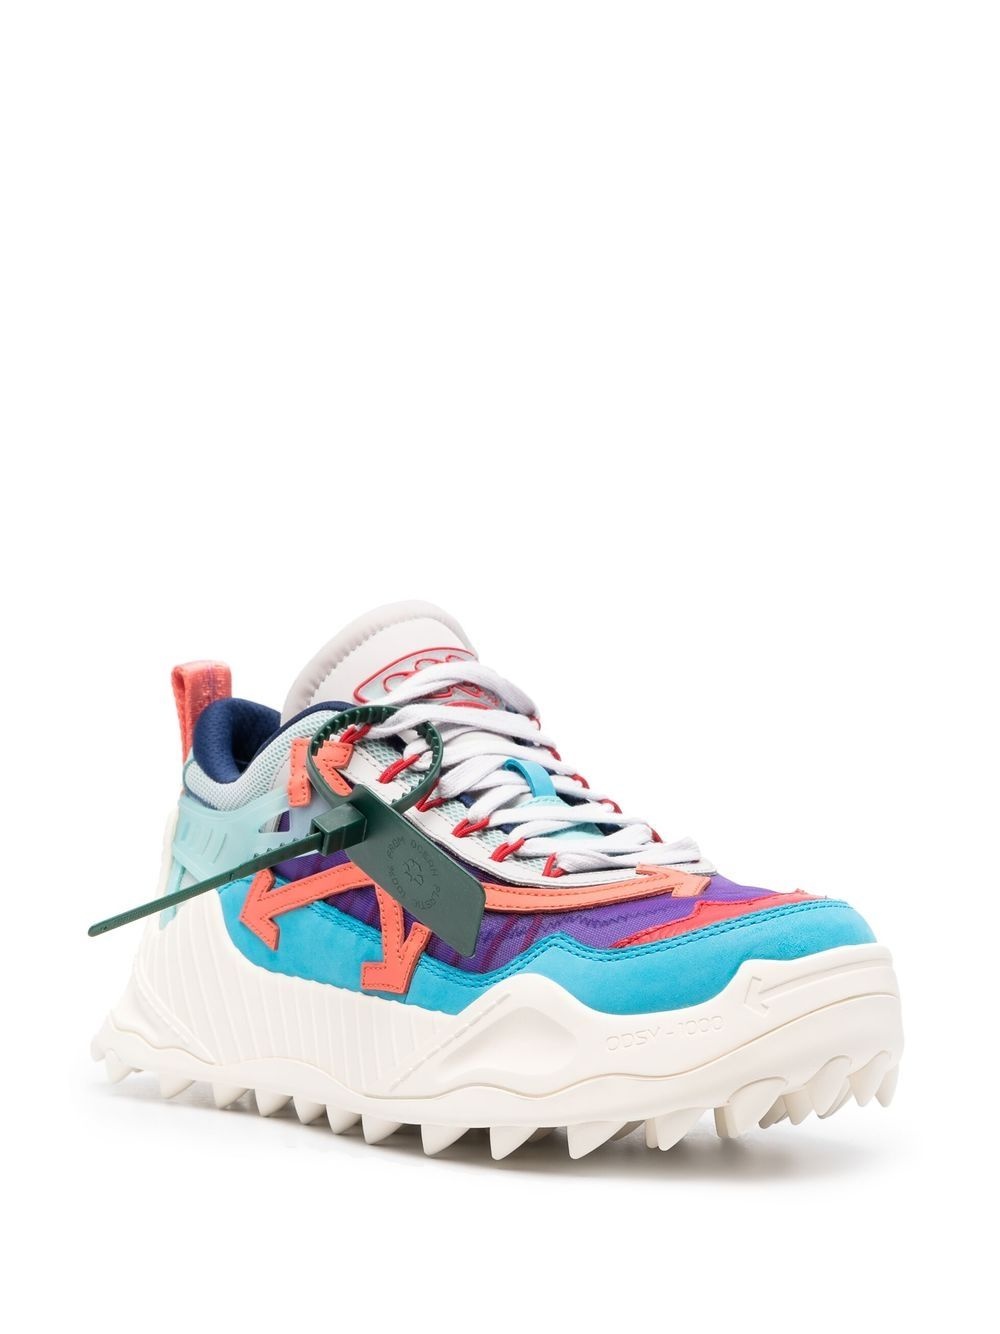 Off-White Odsy-1000 low-top sneakers | REVERSIBLE